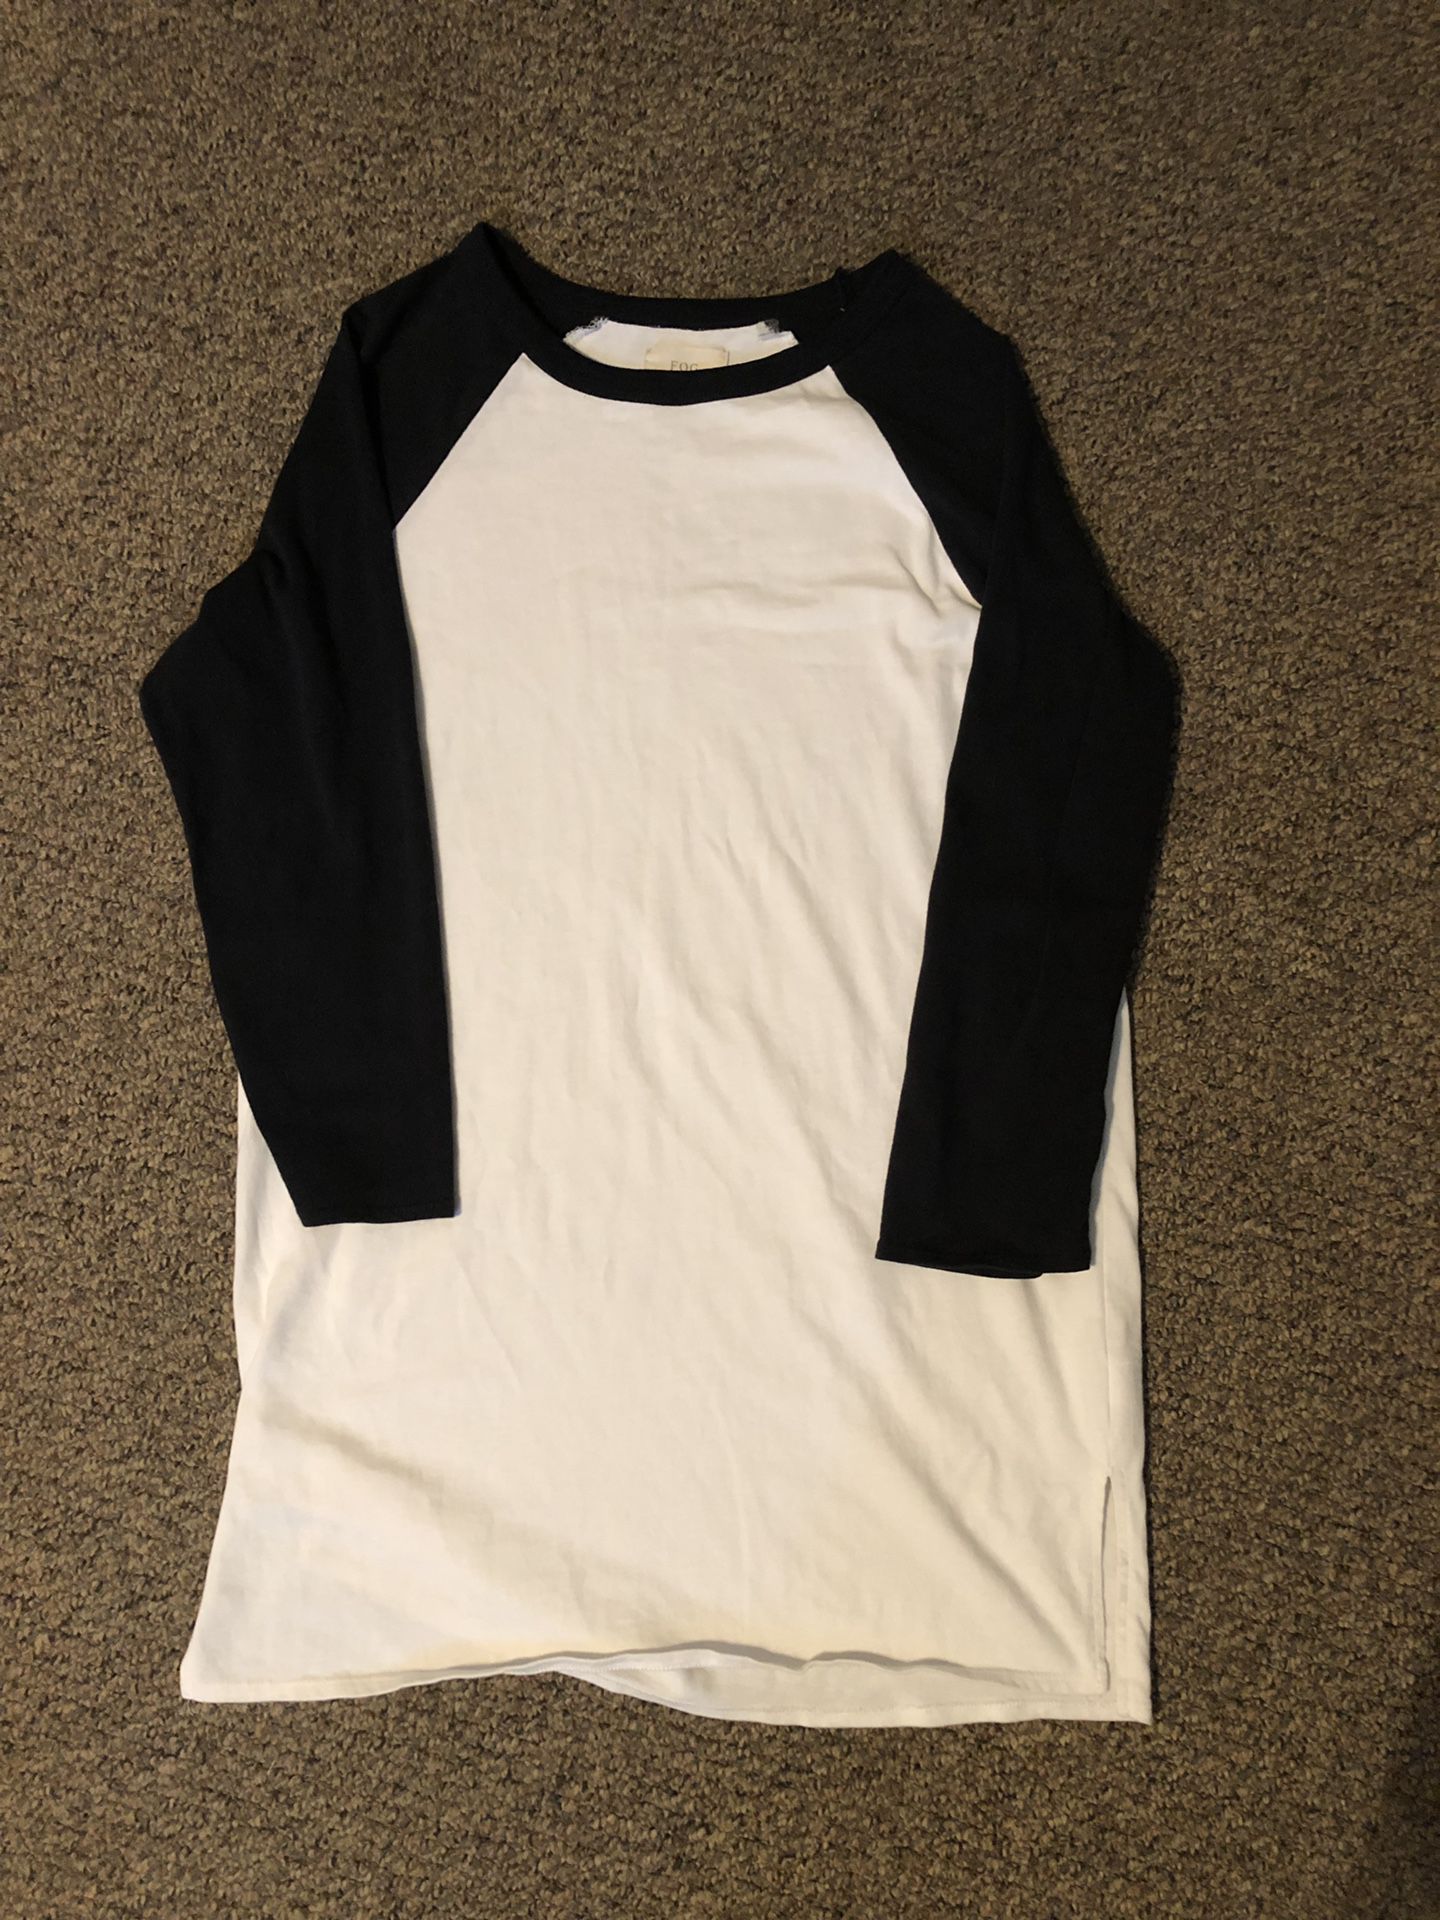 Fear of God FOG Baseball Tee Size S Collection One